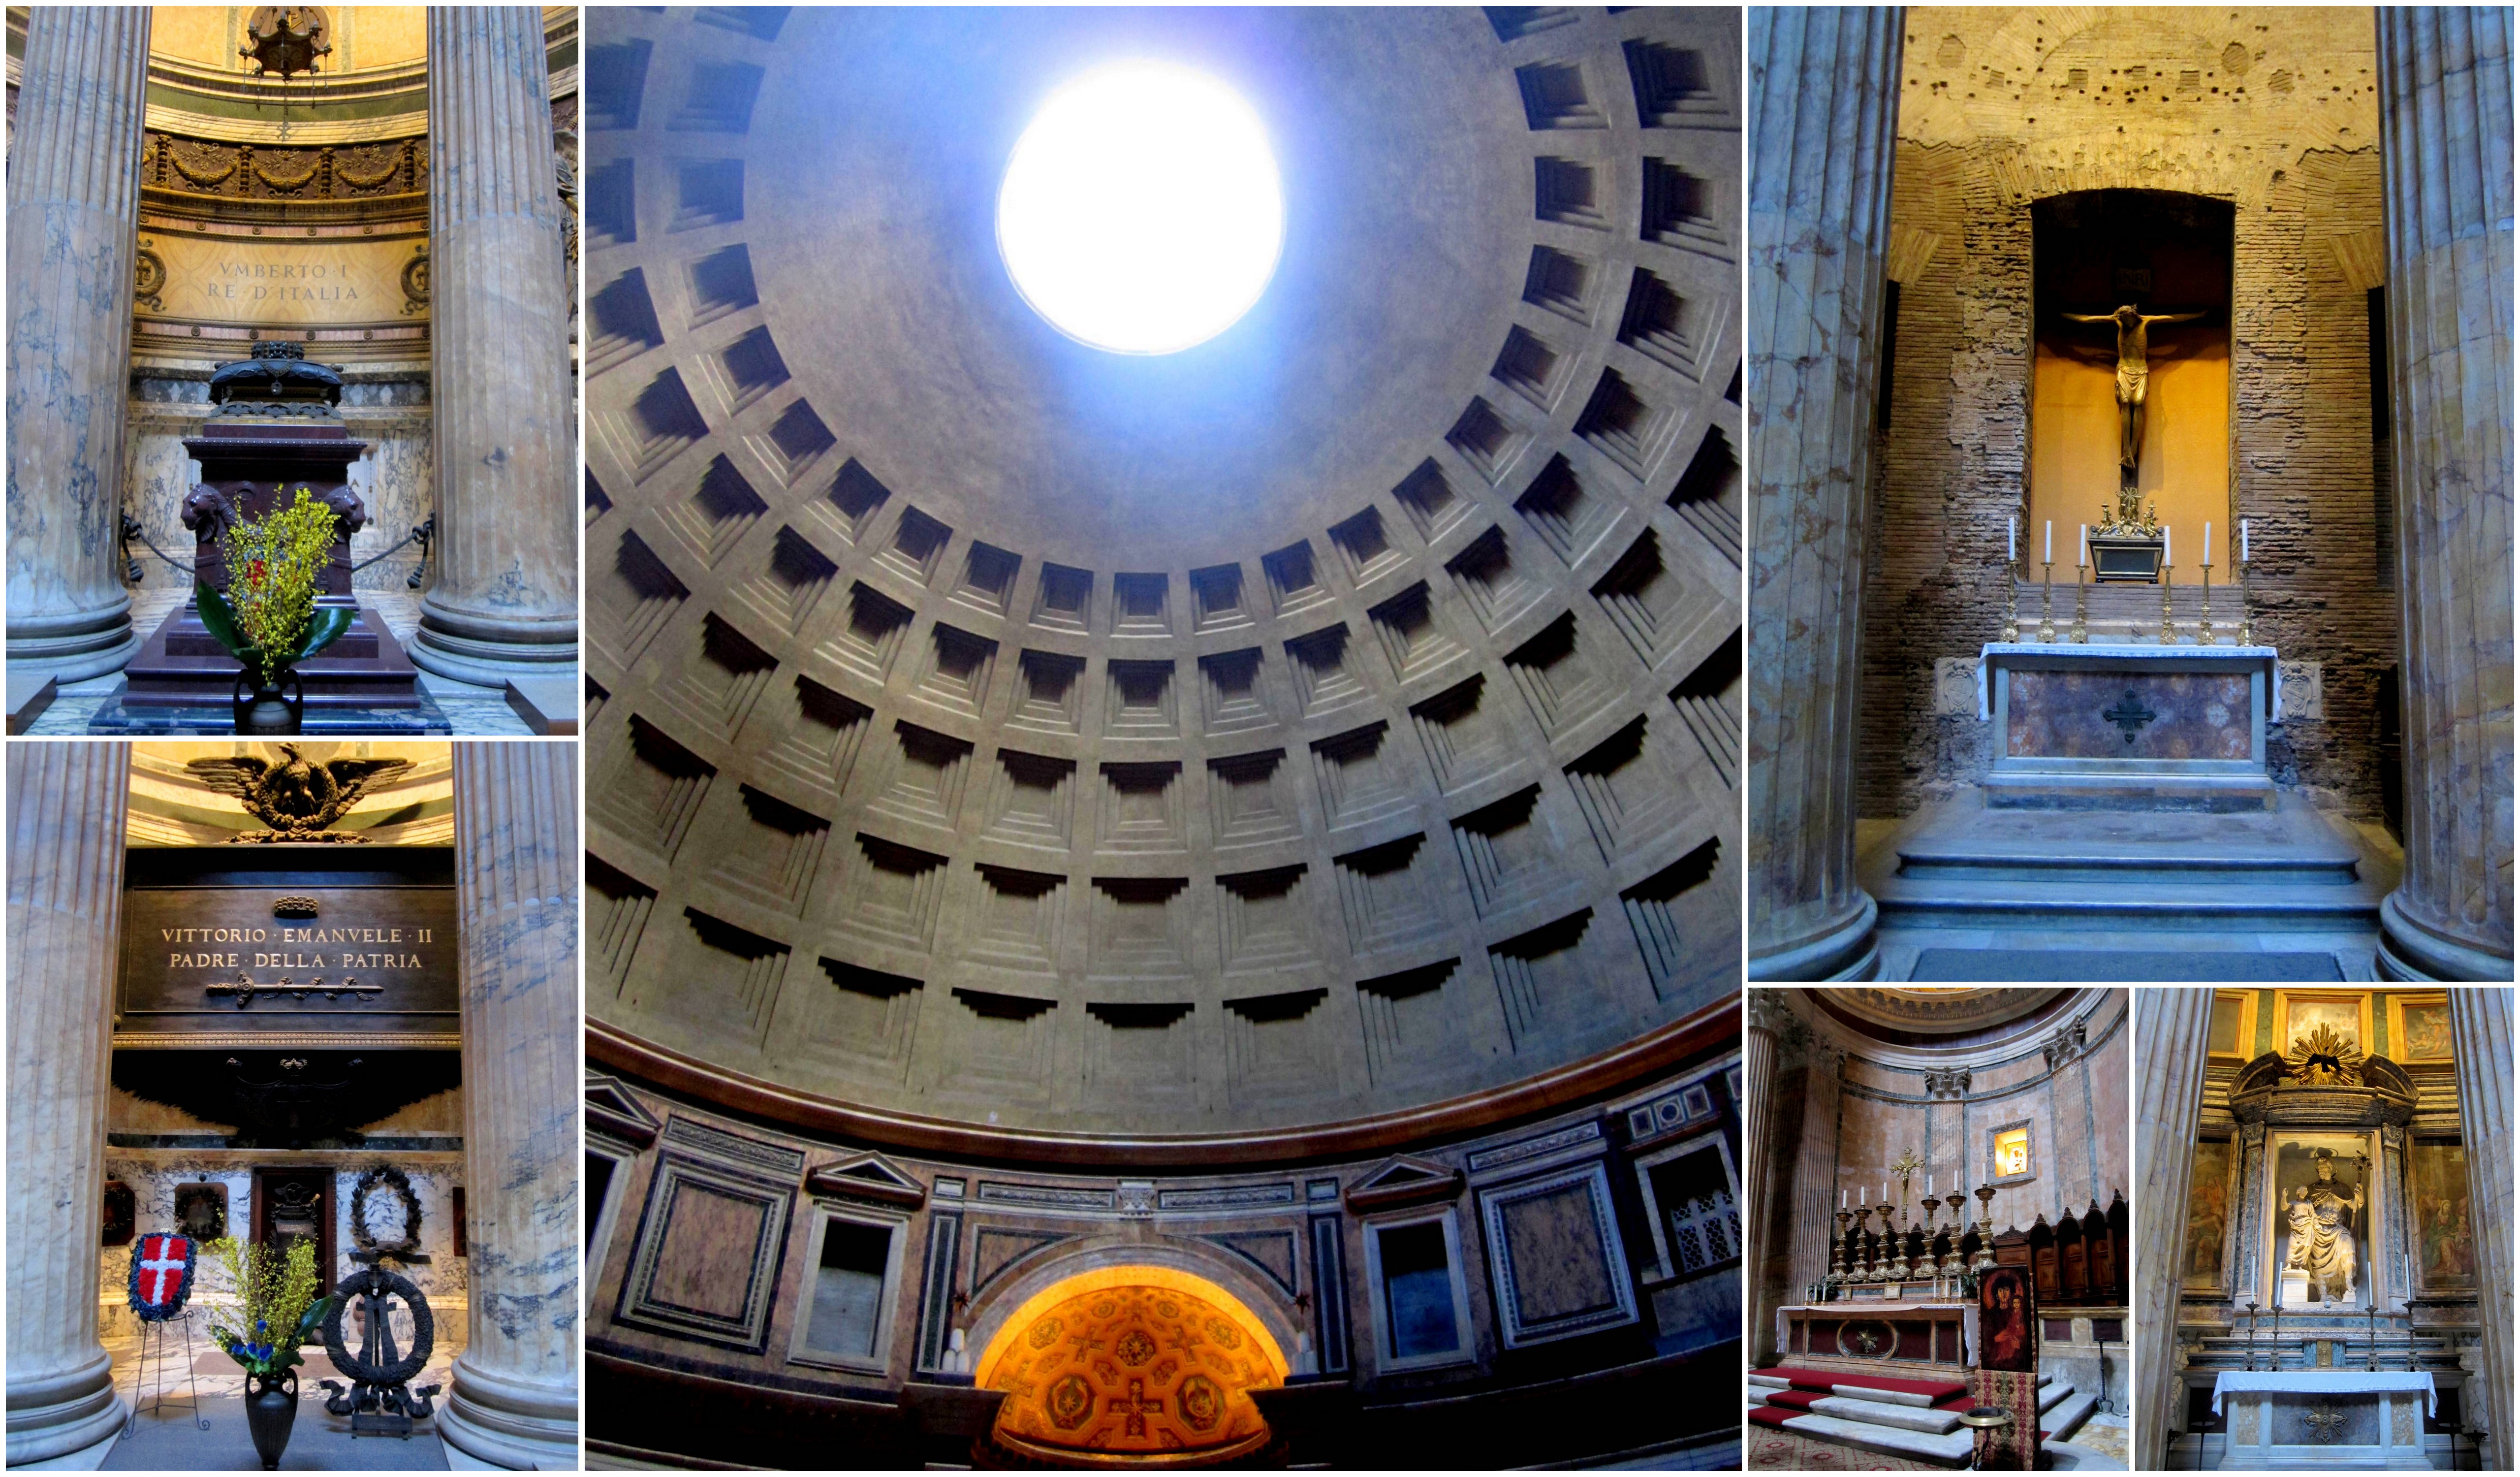 Inside the Pantheon. Rome, Italy